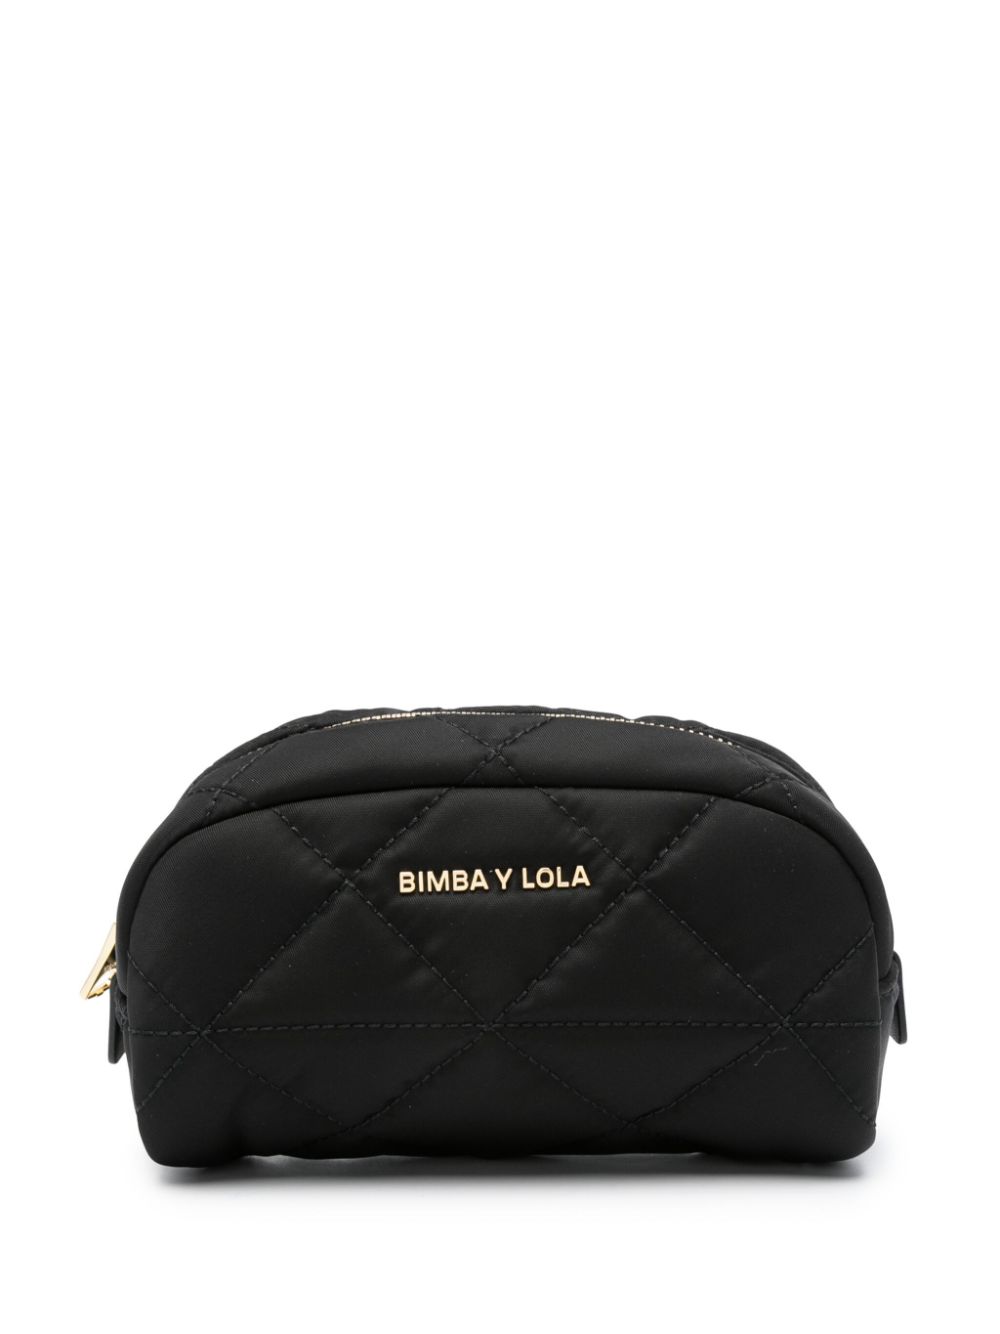 Image 1 of Bimba y Lola logo-lettering quilted make-up bag